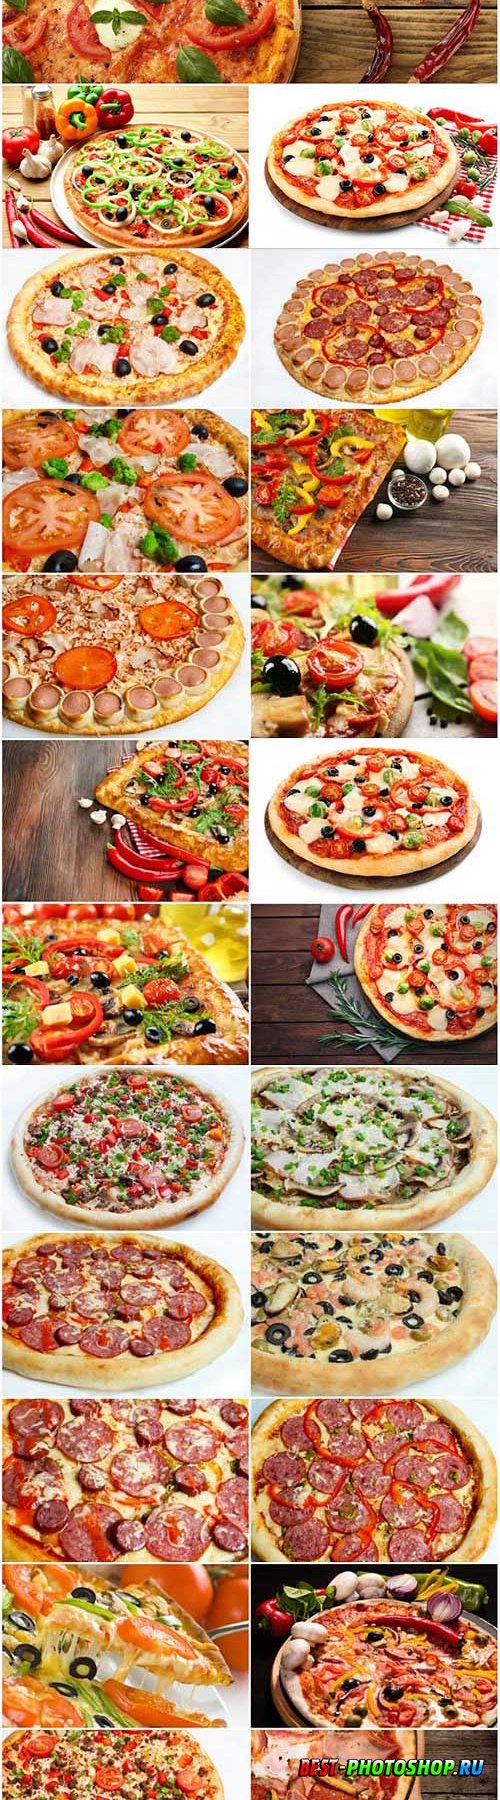 Pizza with different flavors stock photo